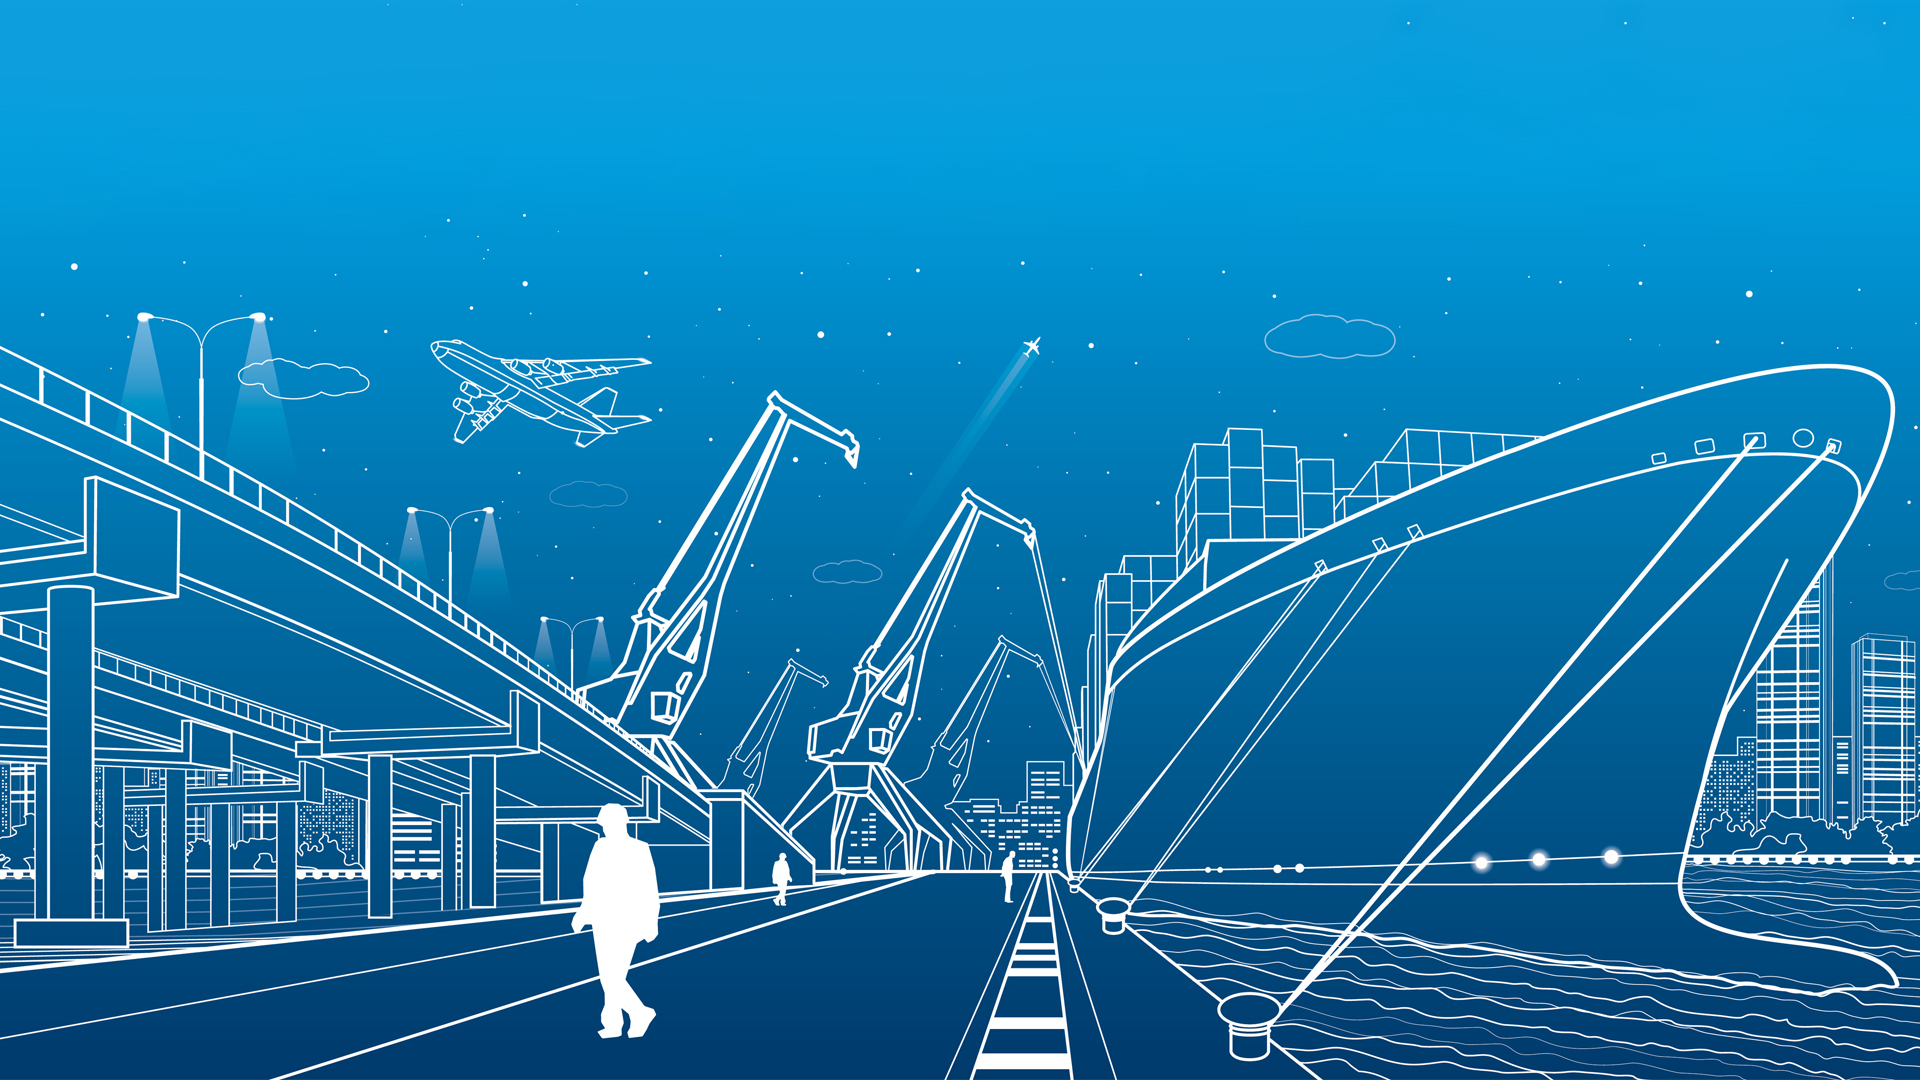 Transportation and industrial panorama. Cargo ship loading, boats on the water, sea harbor. Transport overpass, highway, urban scene, airplane fly, night city, people go on the pier. Vector design art image